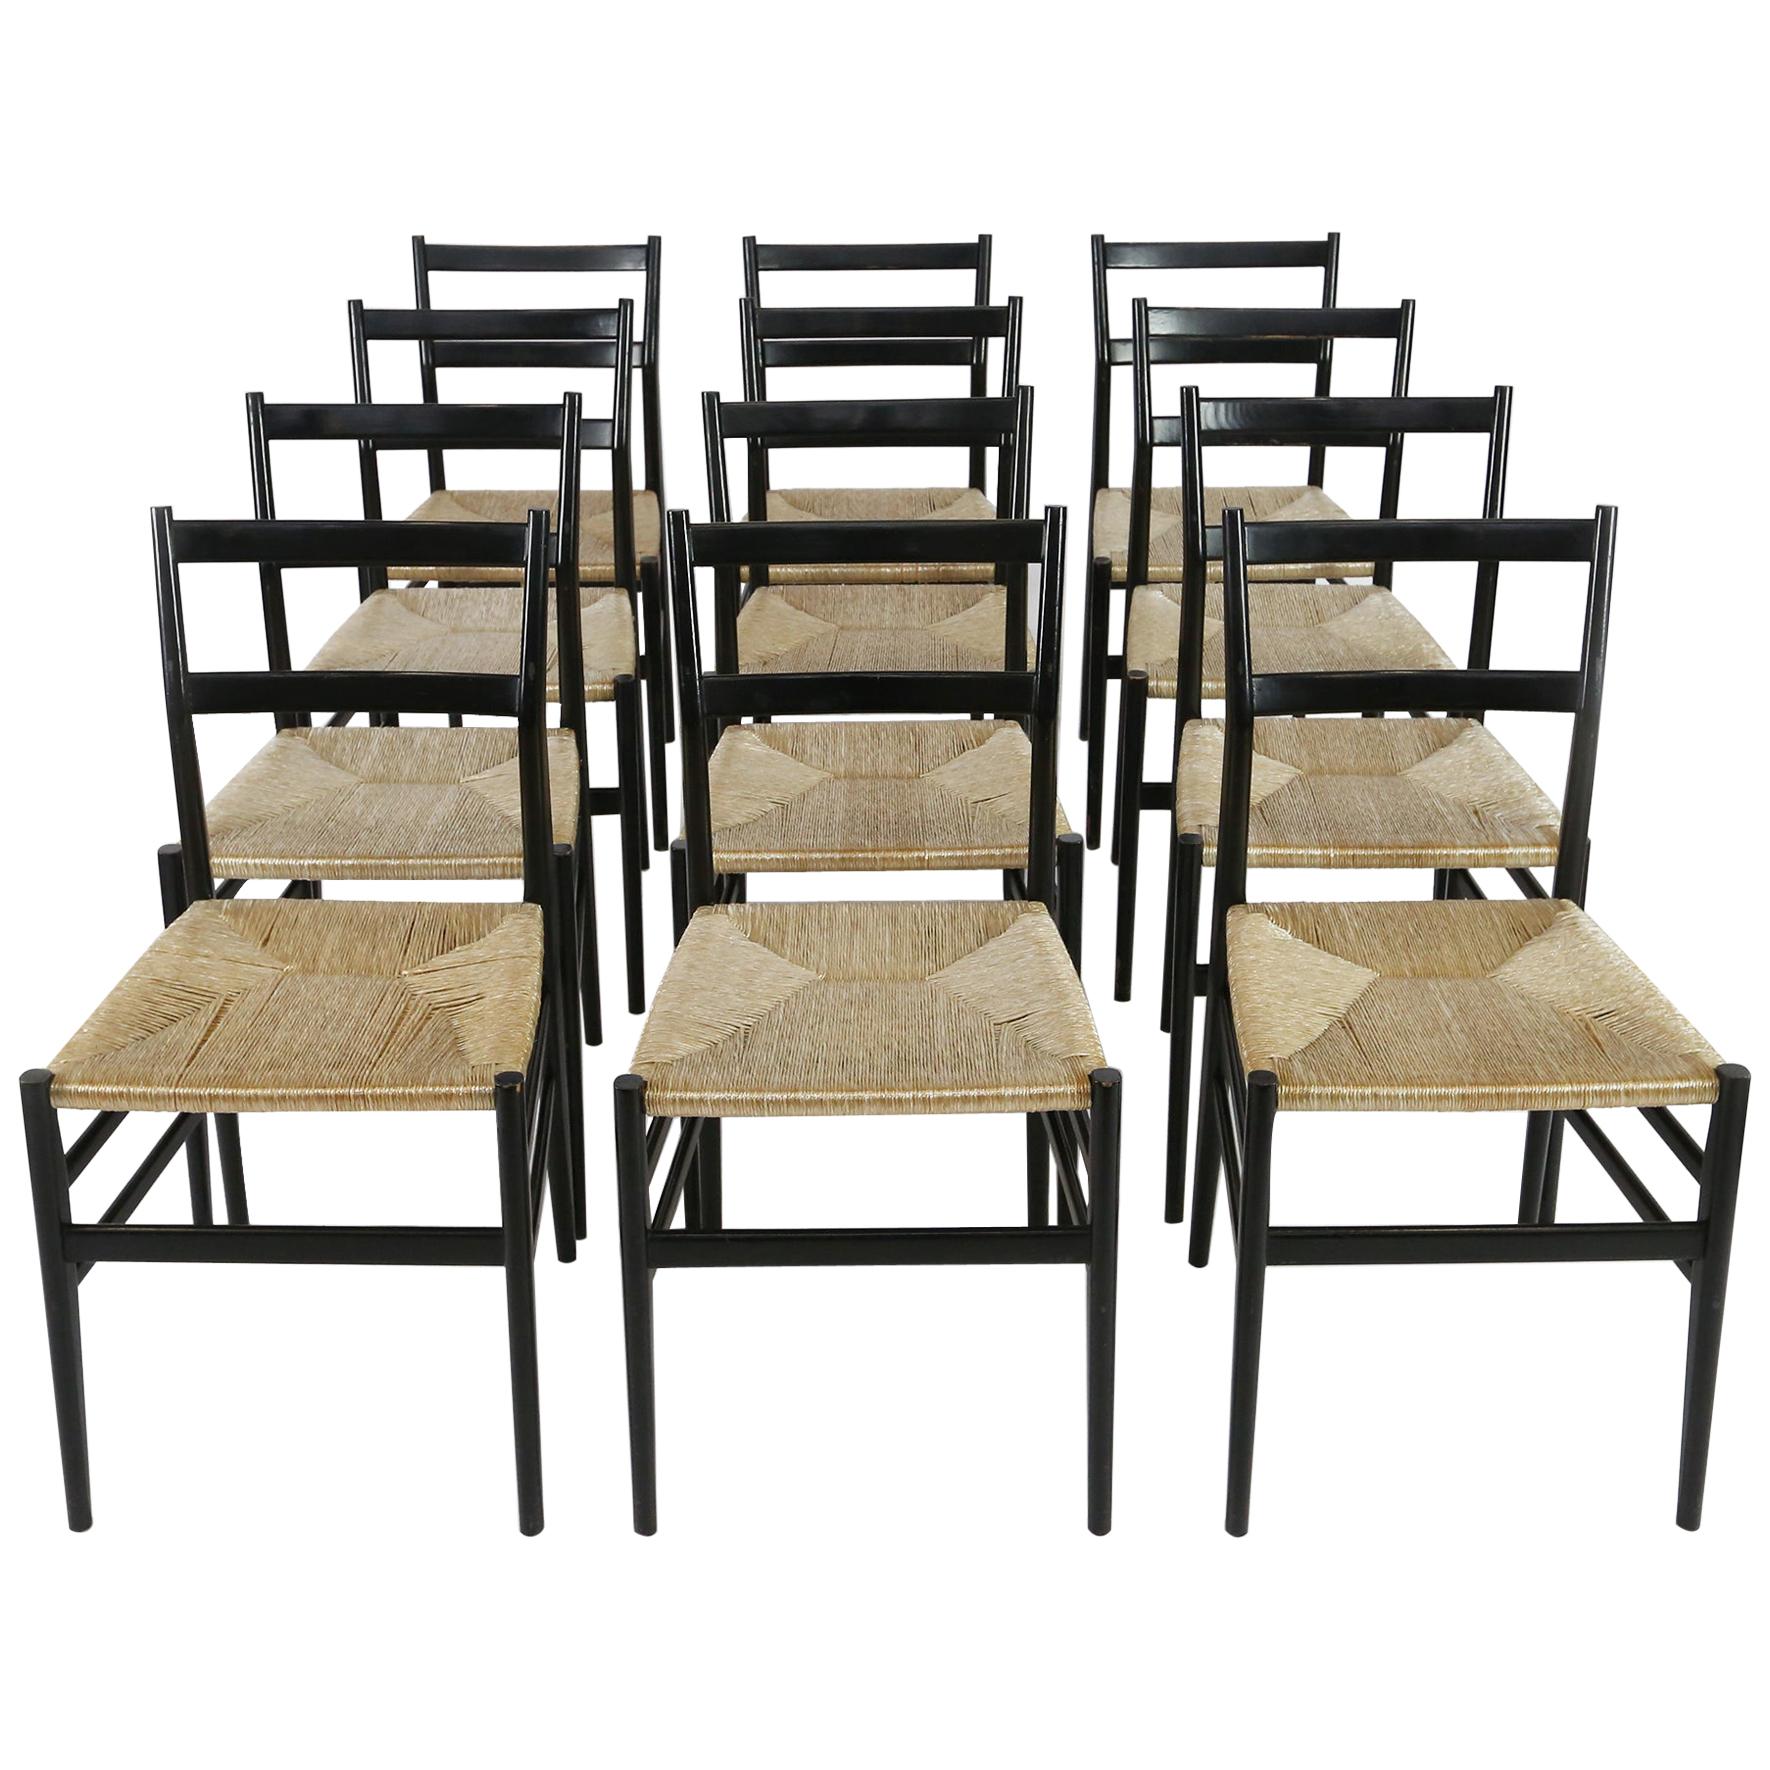 12 Leggera Chairs by Gio Ponti by Cassina, Milano, 1960s For Sale